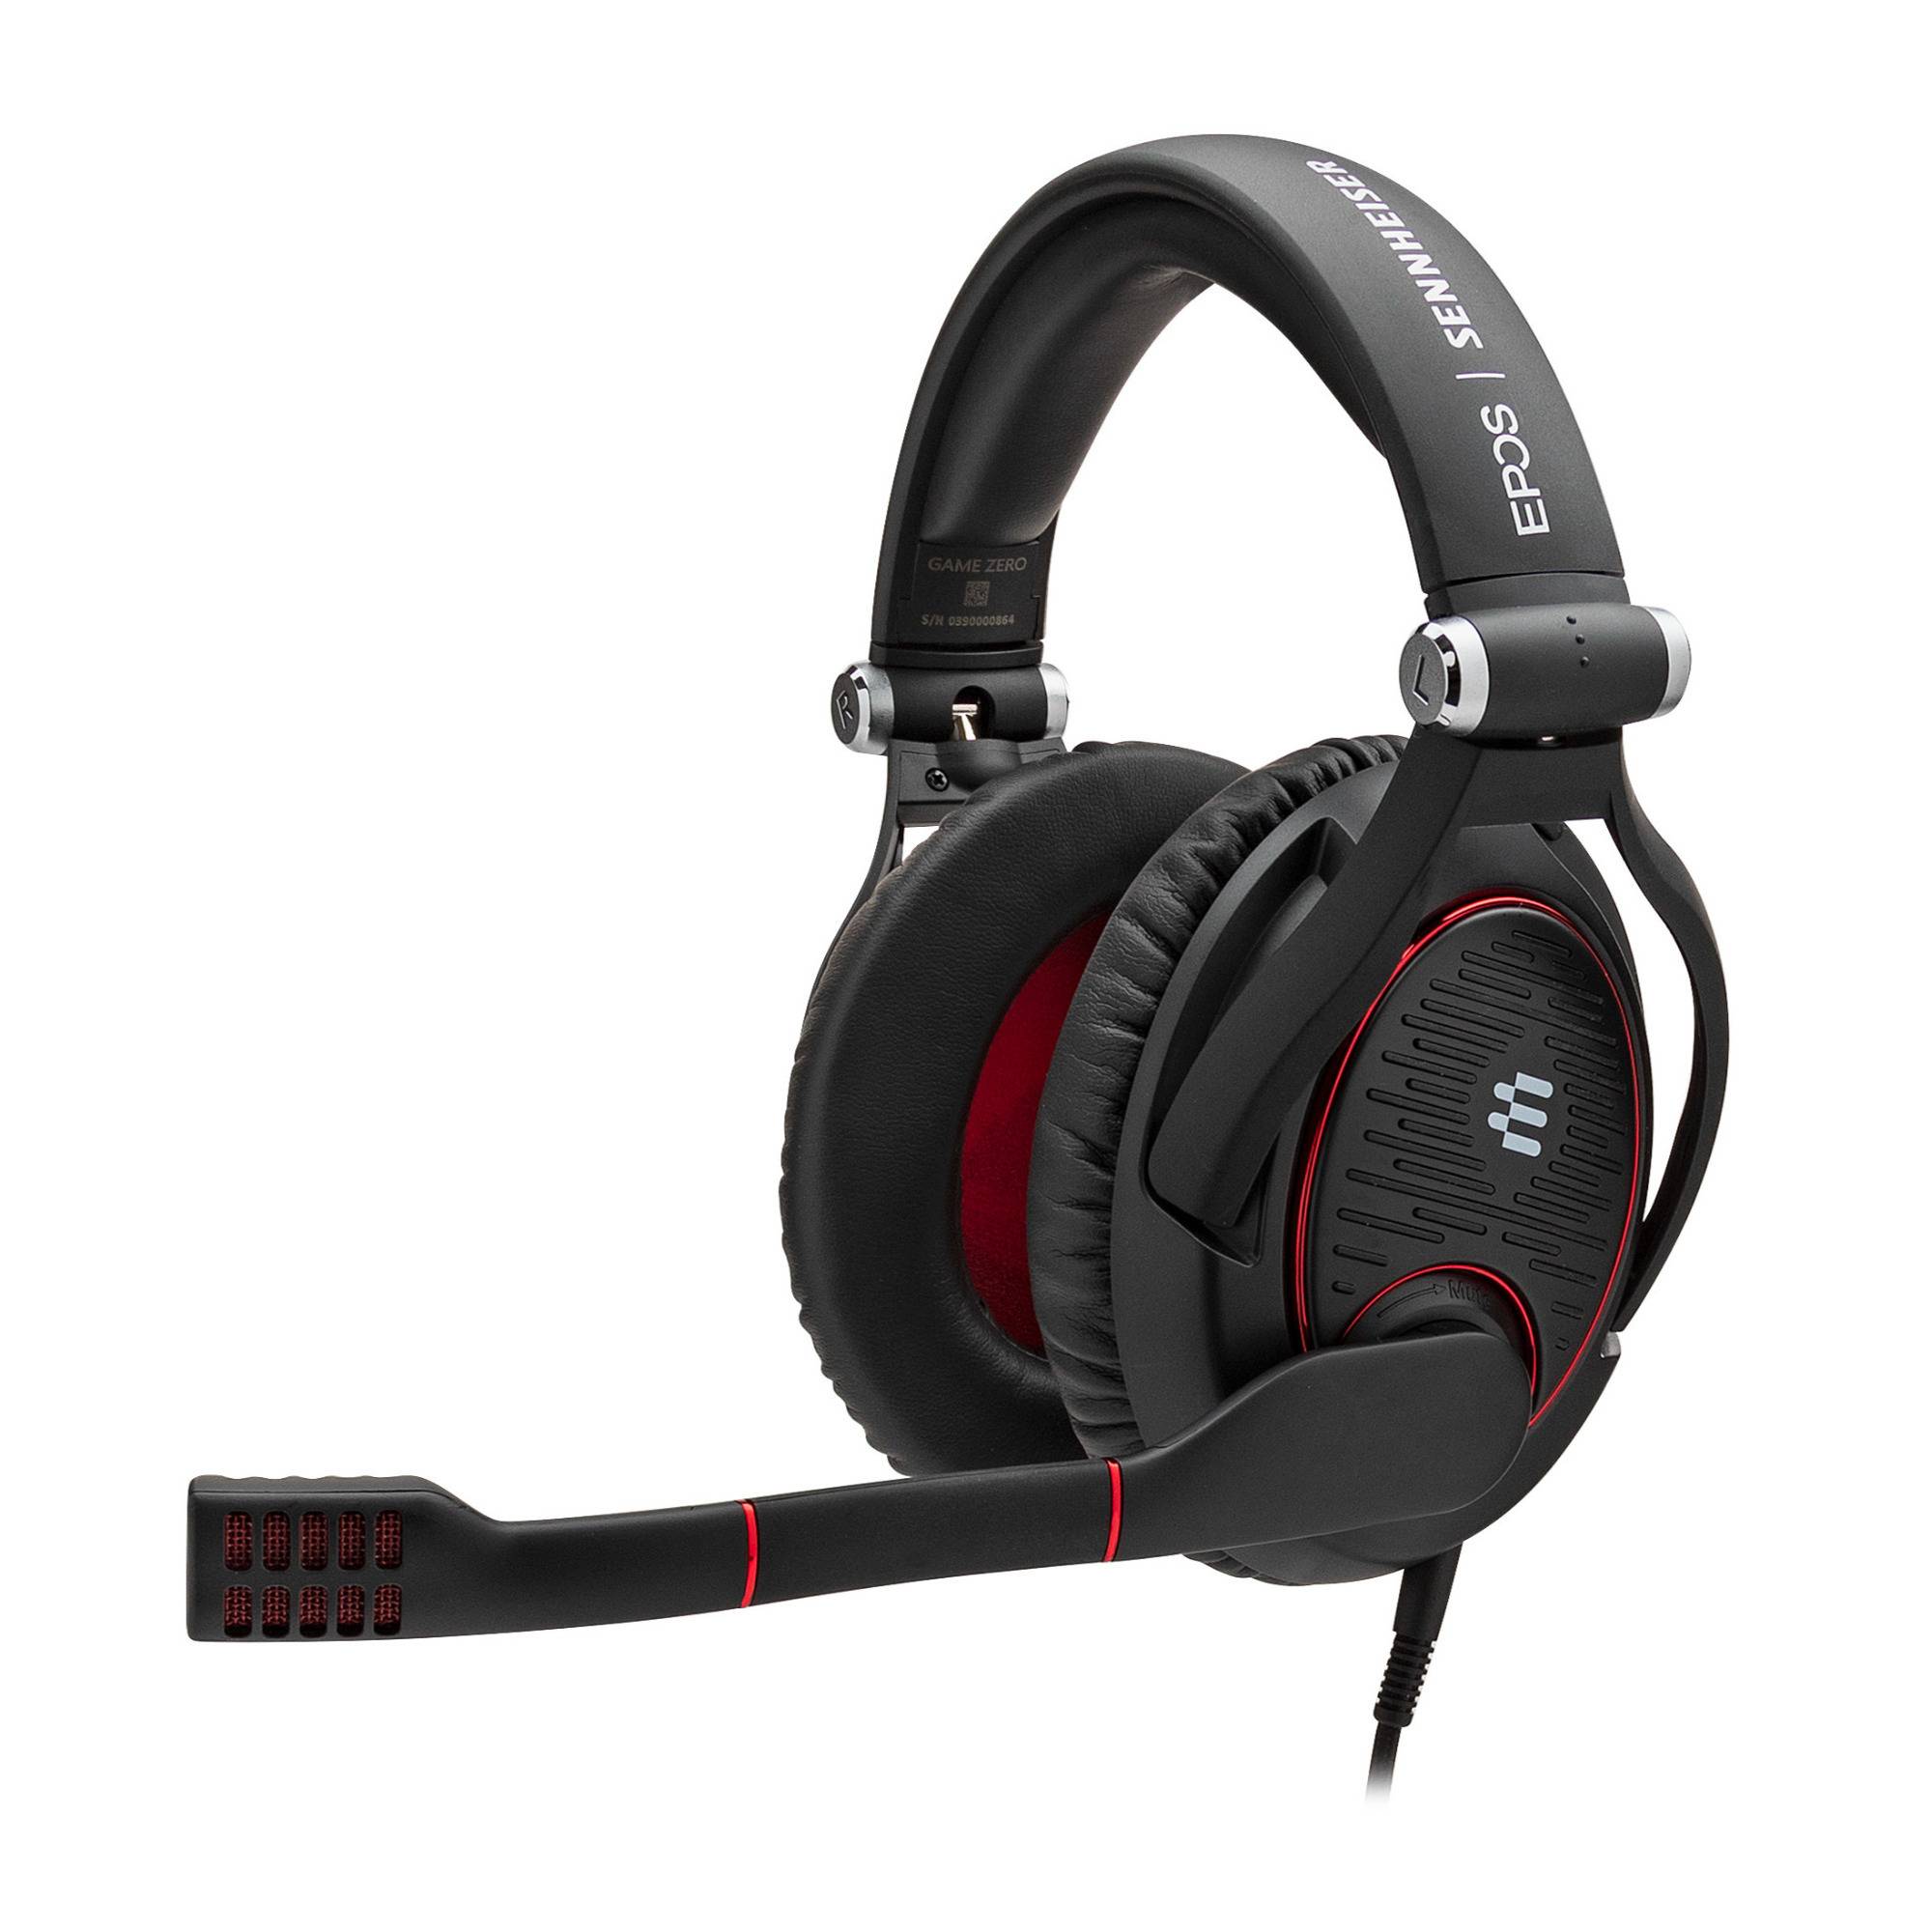 Sennheiser GAME ZERO Gaming Headset with Flip-to-Mute Noise-Cancelling Microphone (Black)